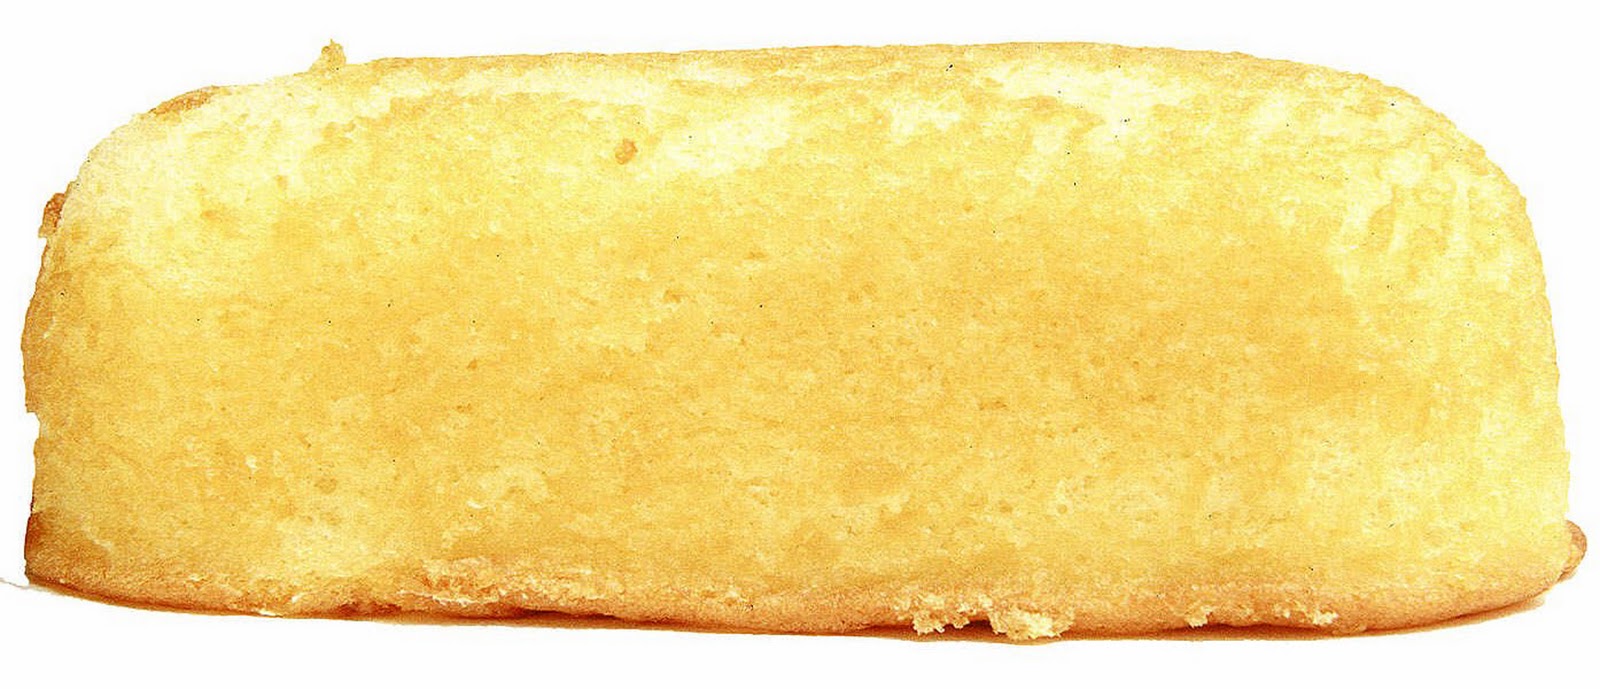 Share this post. twinkie.jpg. 